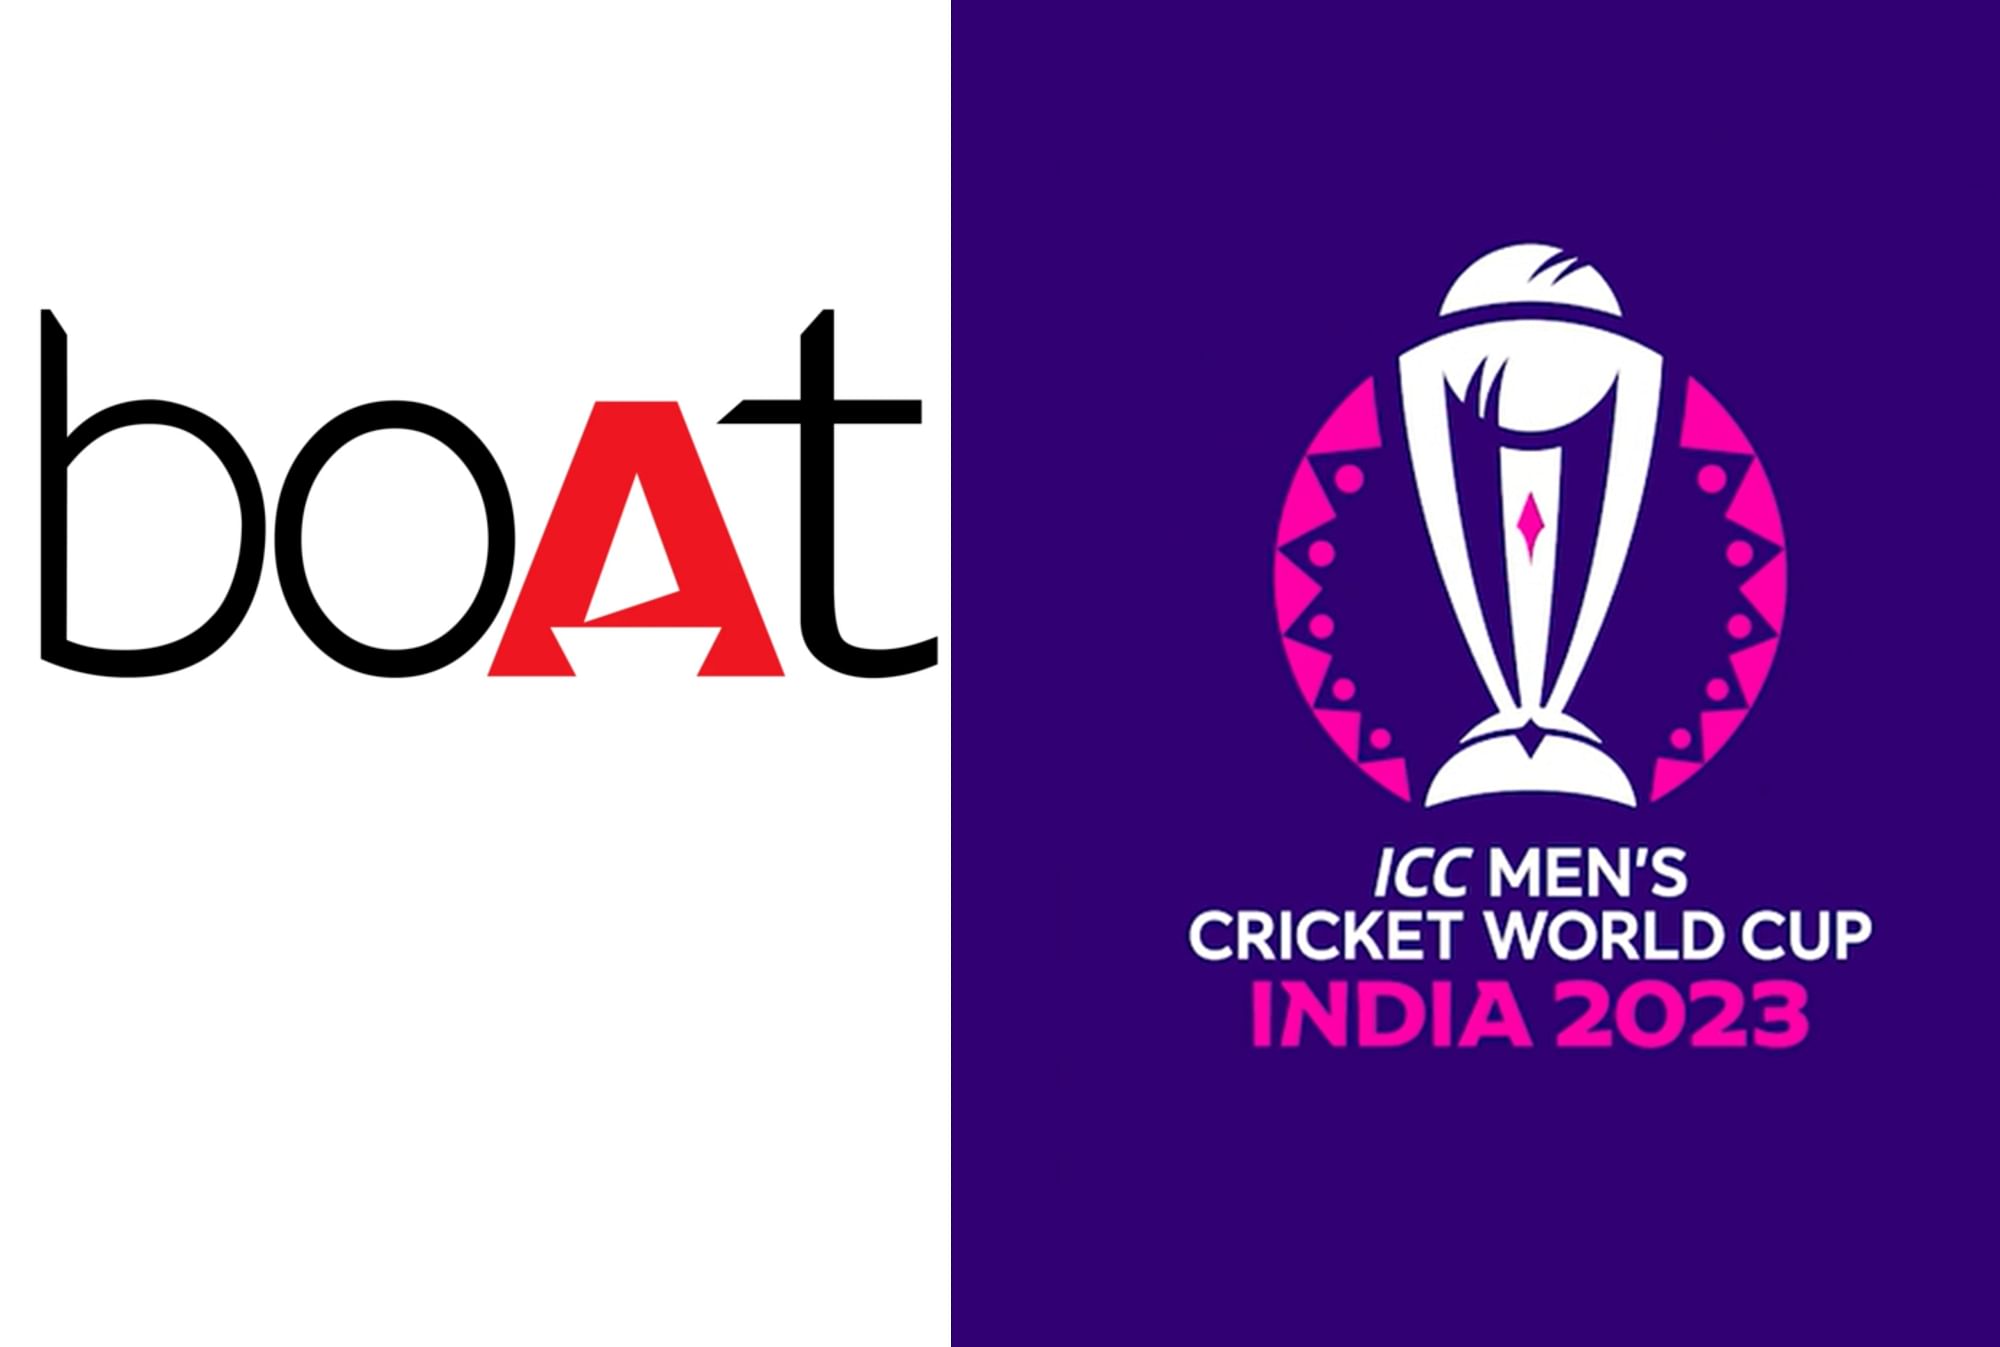 World Cup 2023 logo unveiled on 12th anniversary of India's 2011 WC triumph  | Cricket News - Times of India